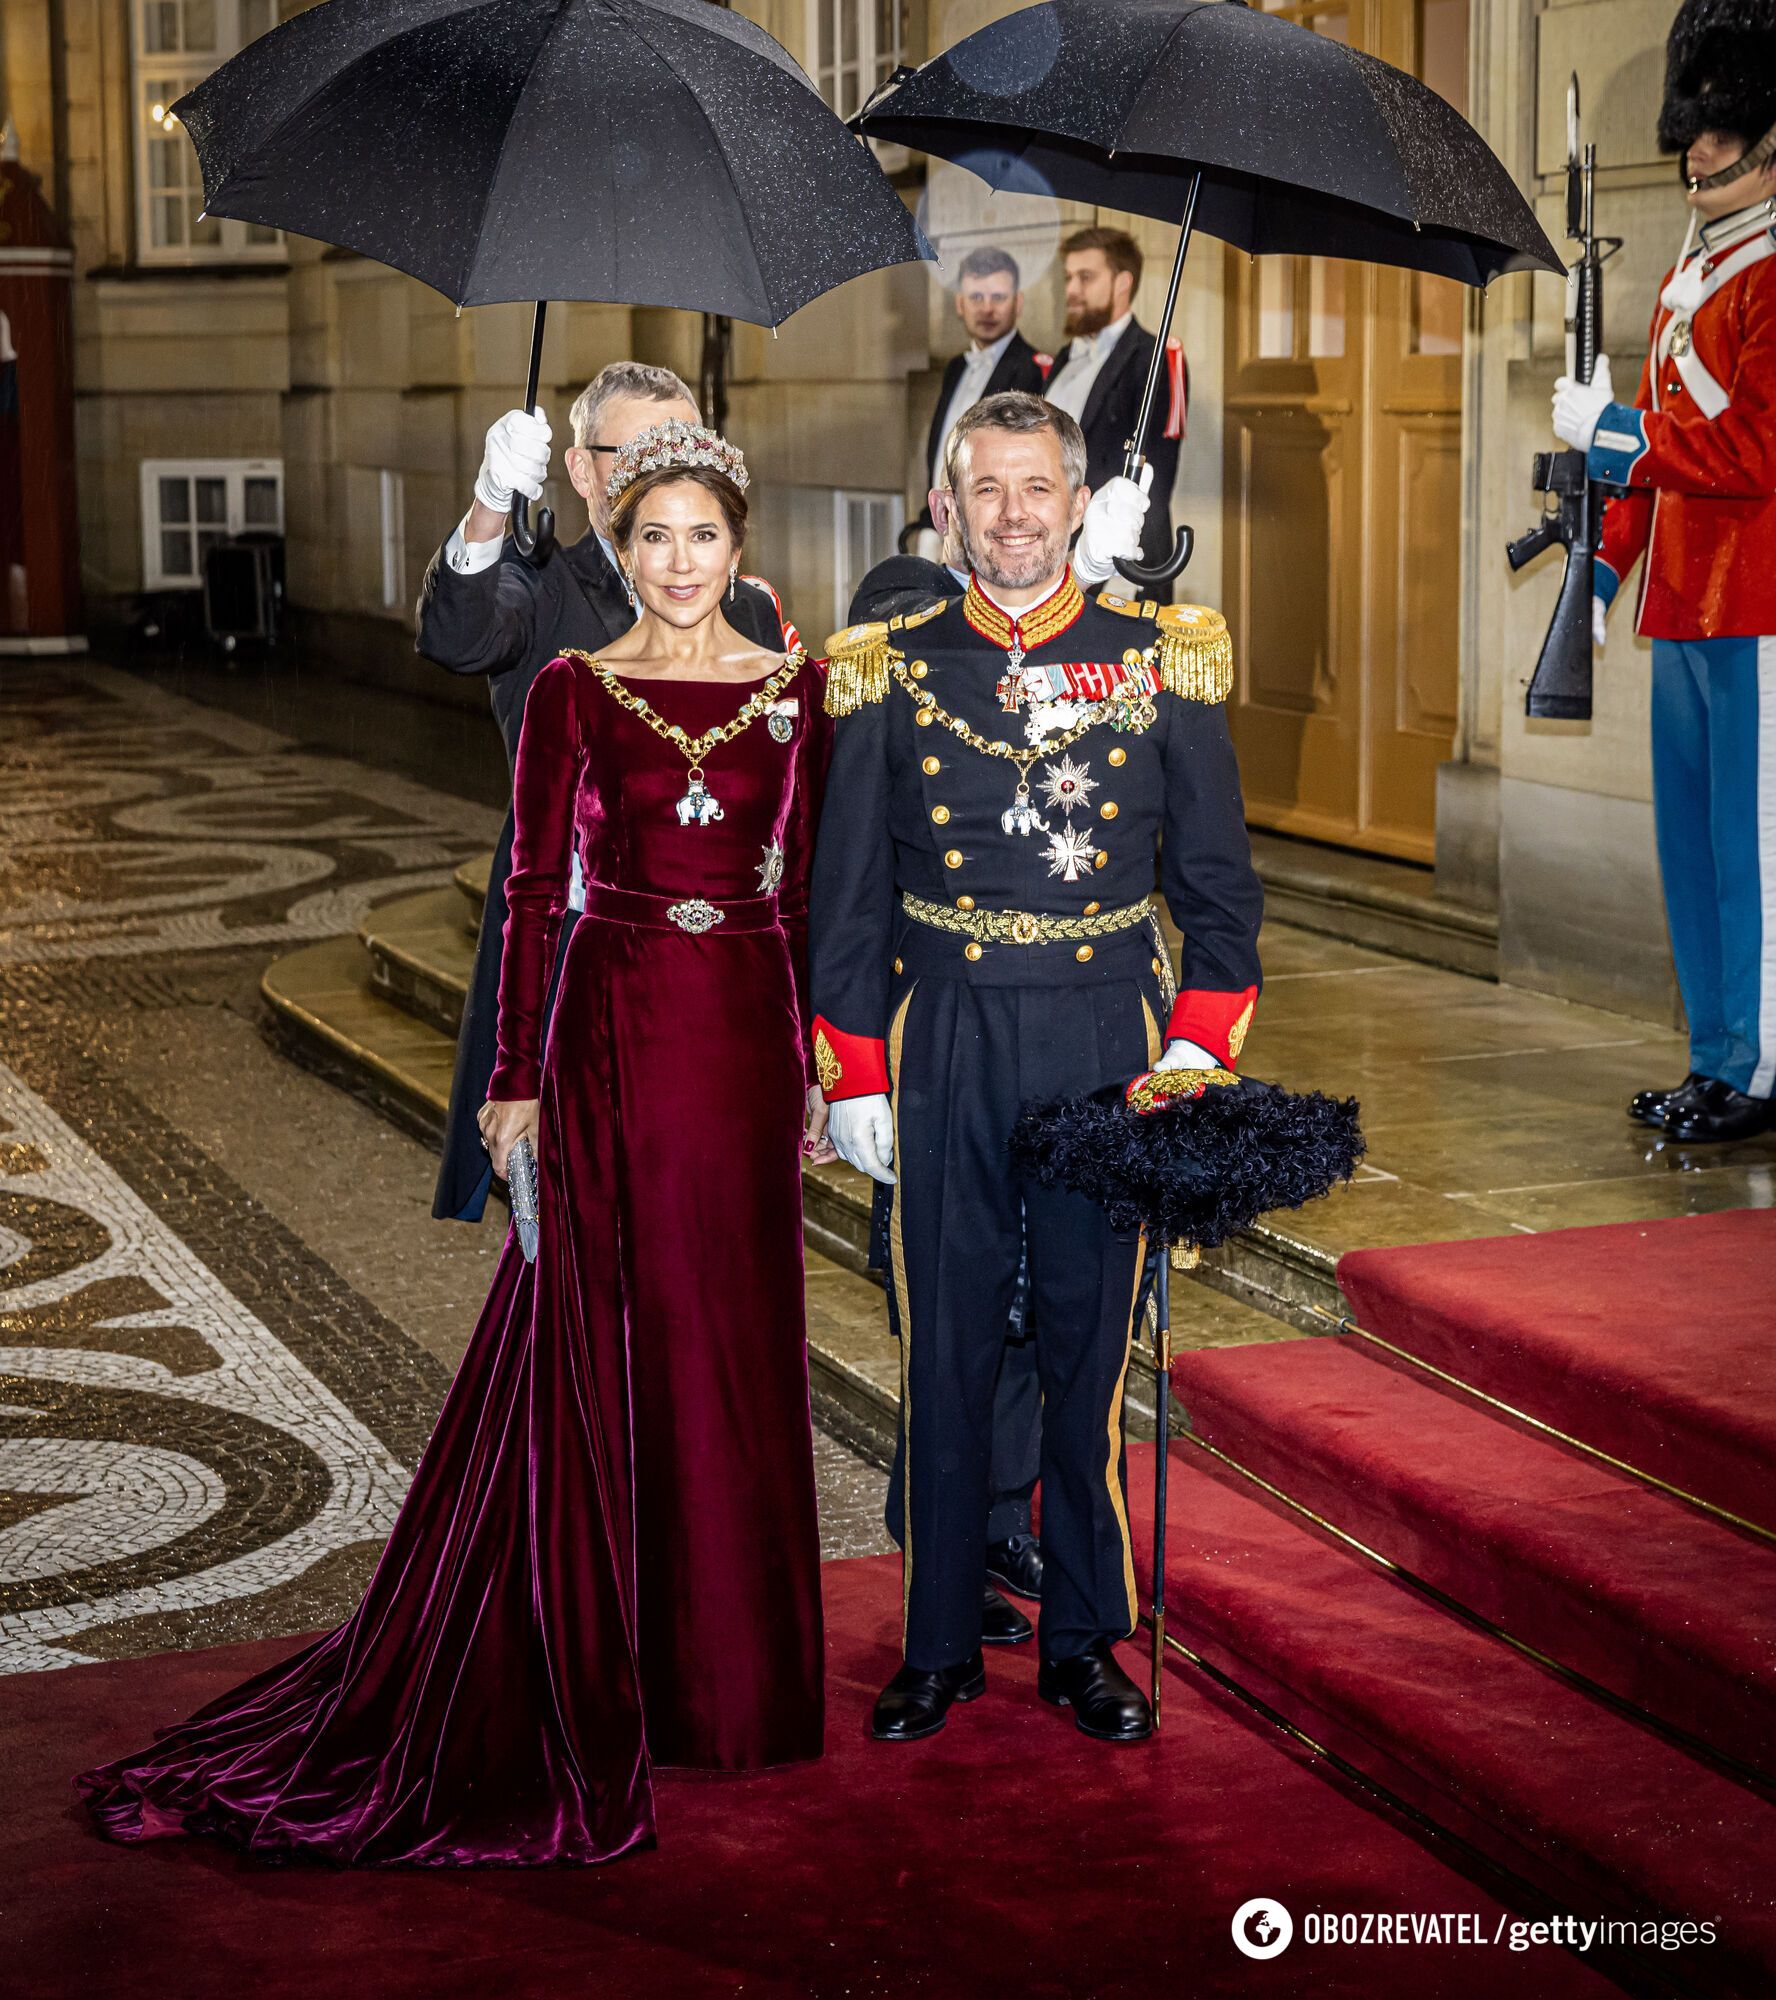 The first official portrait of the King and Queen of Denmark is published